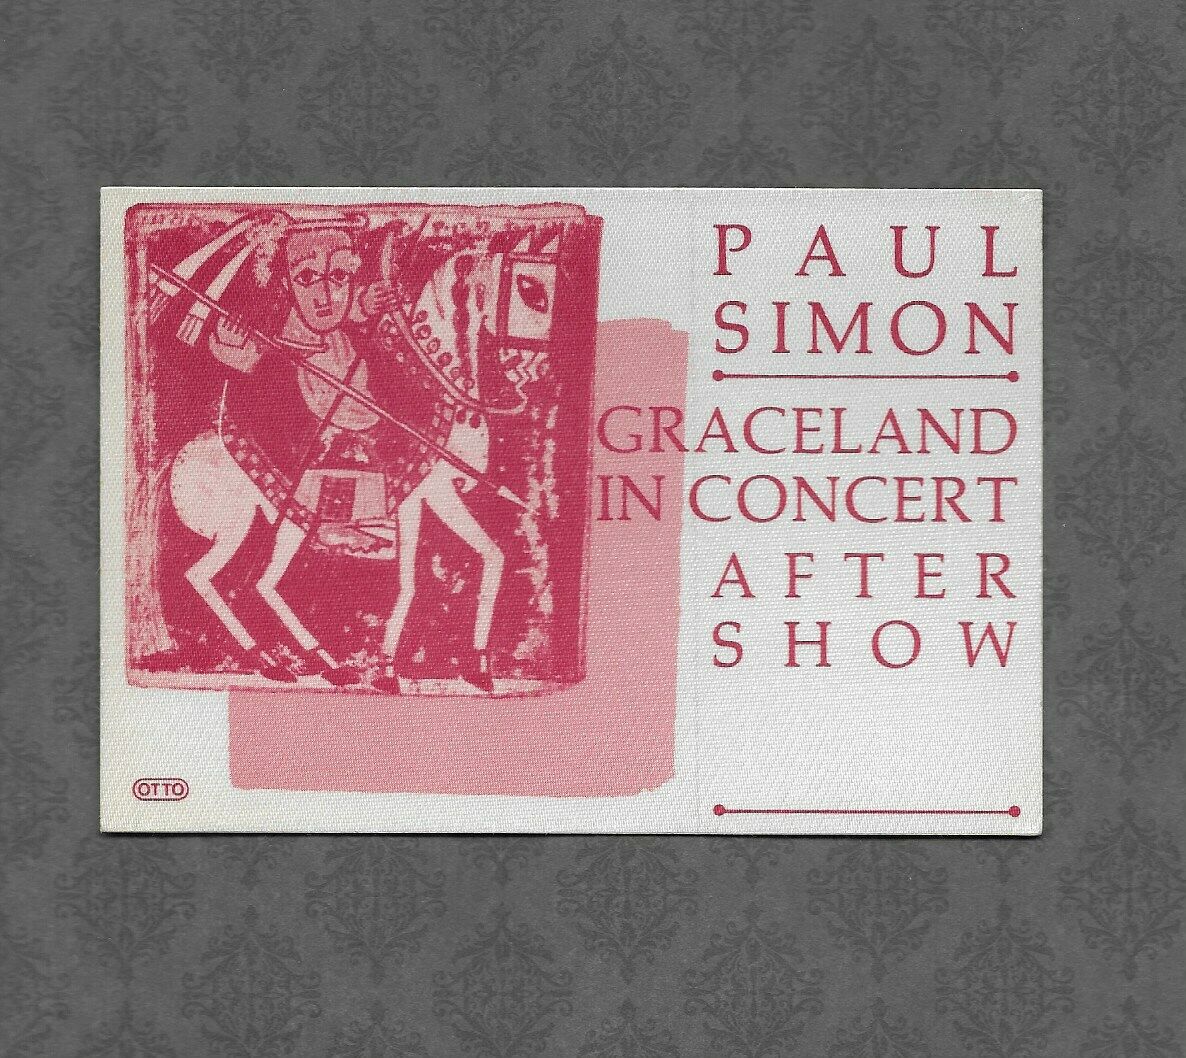 Paul Simon 1986 Graceland In Concert After Show Backstage Pass Unused